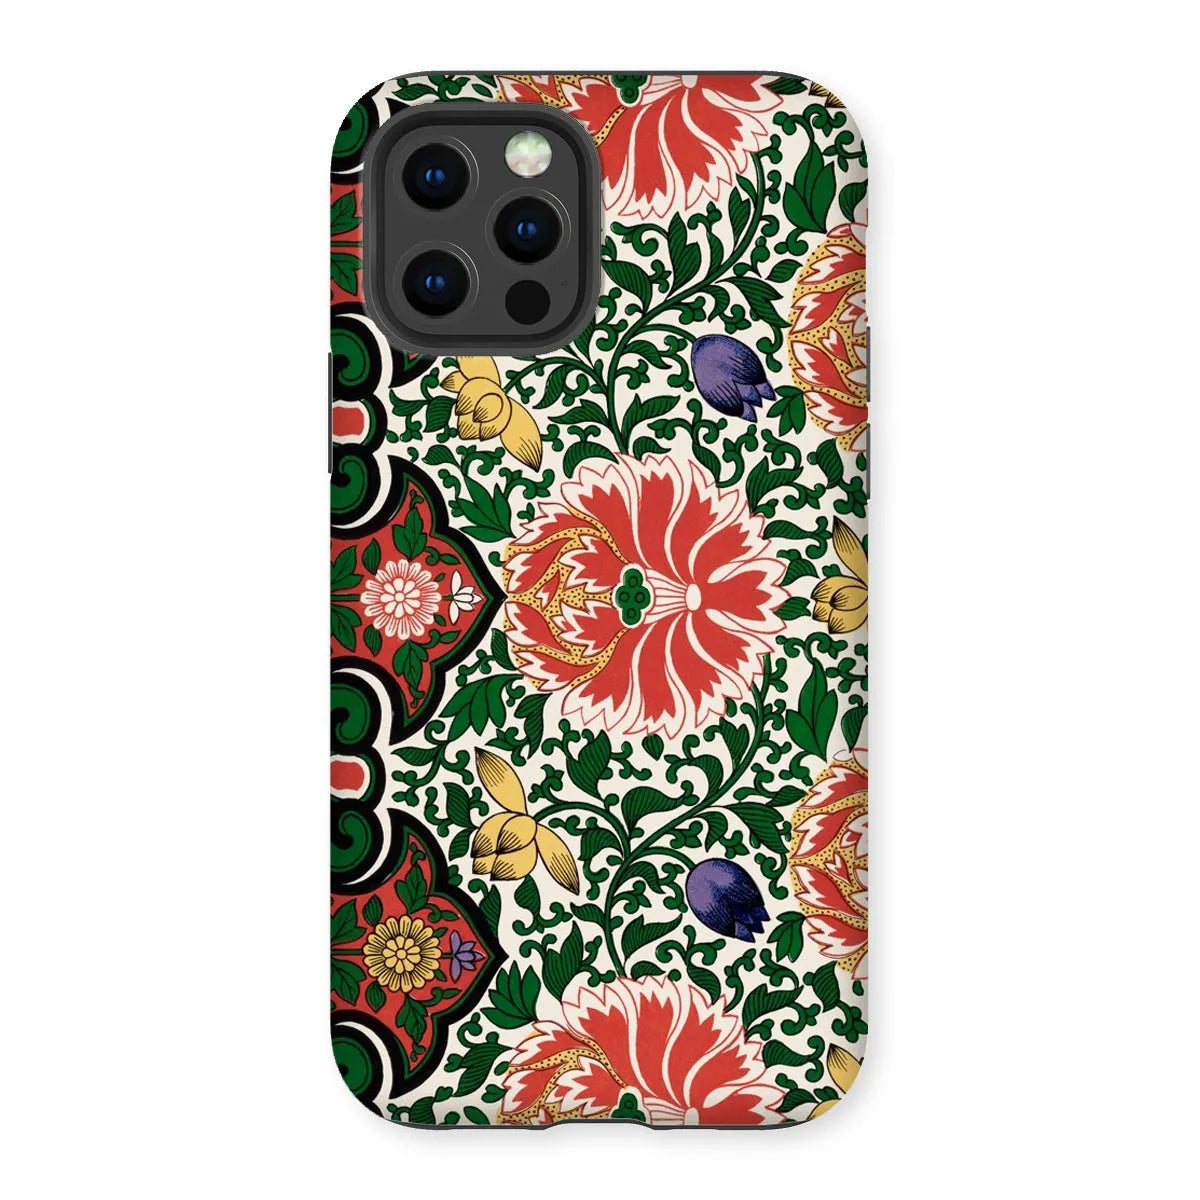 Chinese Floral Pattern Aesthetic Art Phone Case - Owen Jones - Iphone 12 Pro / Matte - Mobile Phone Cases - Aesthetic